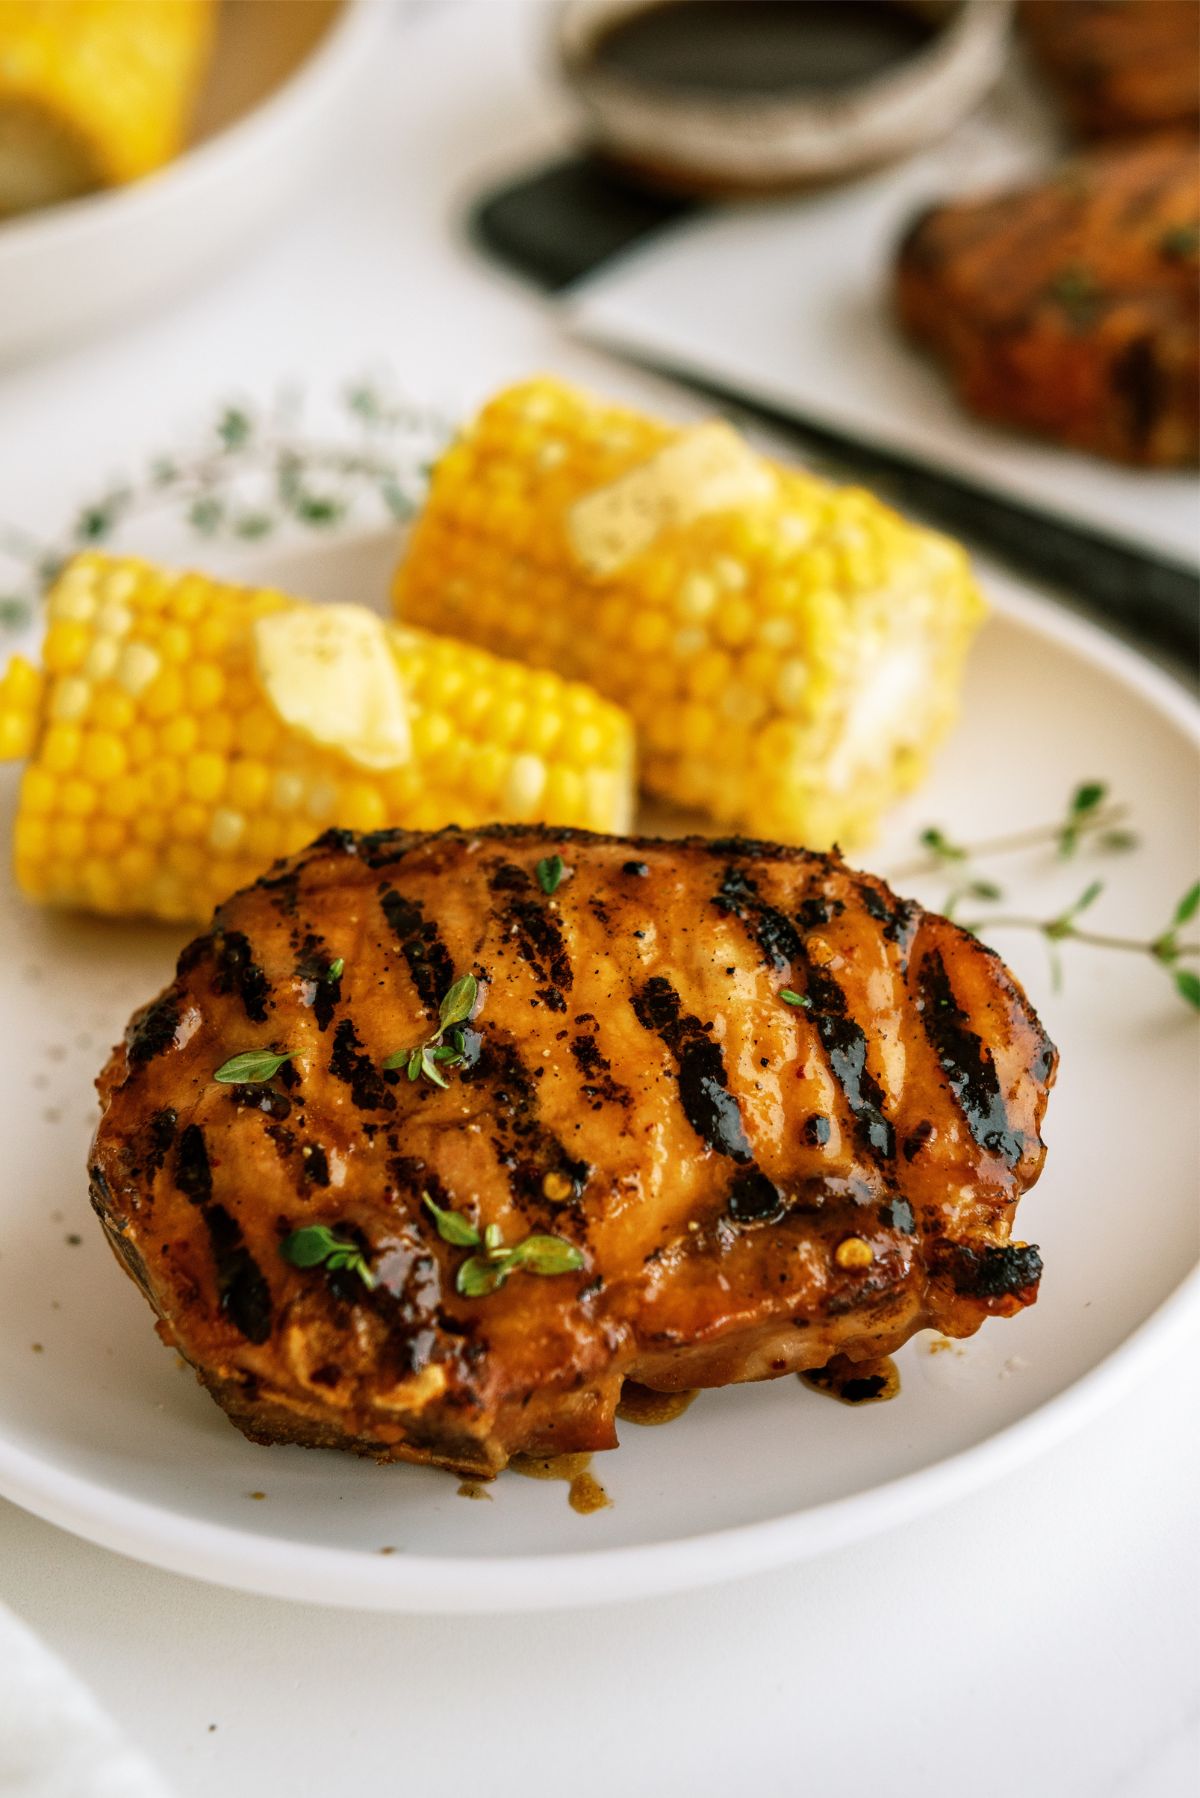 Perfectly Juicy Grilled Pork Chops Recipe